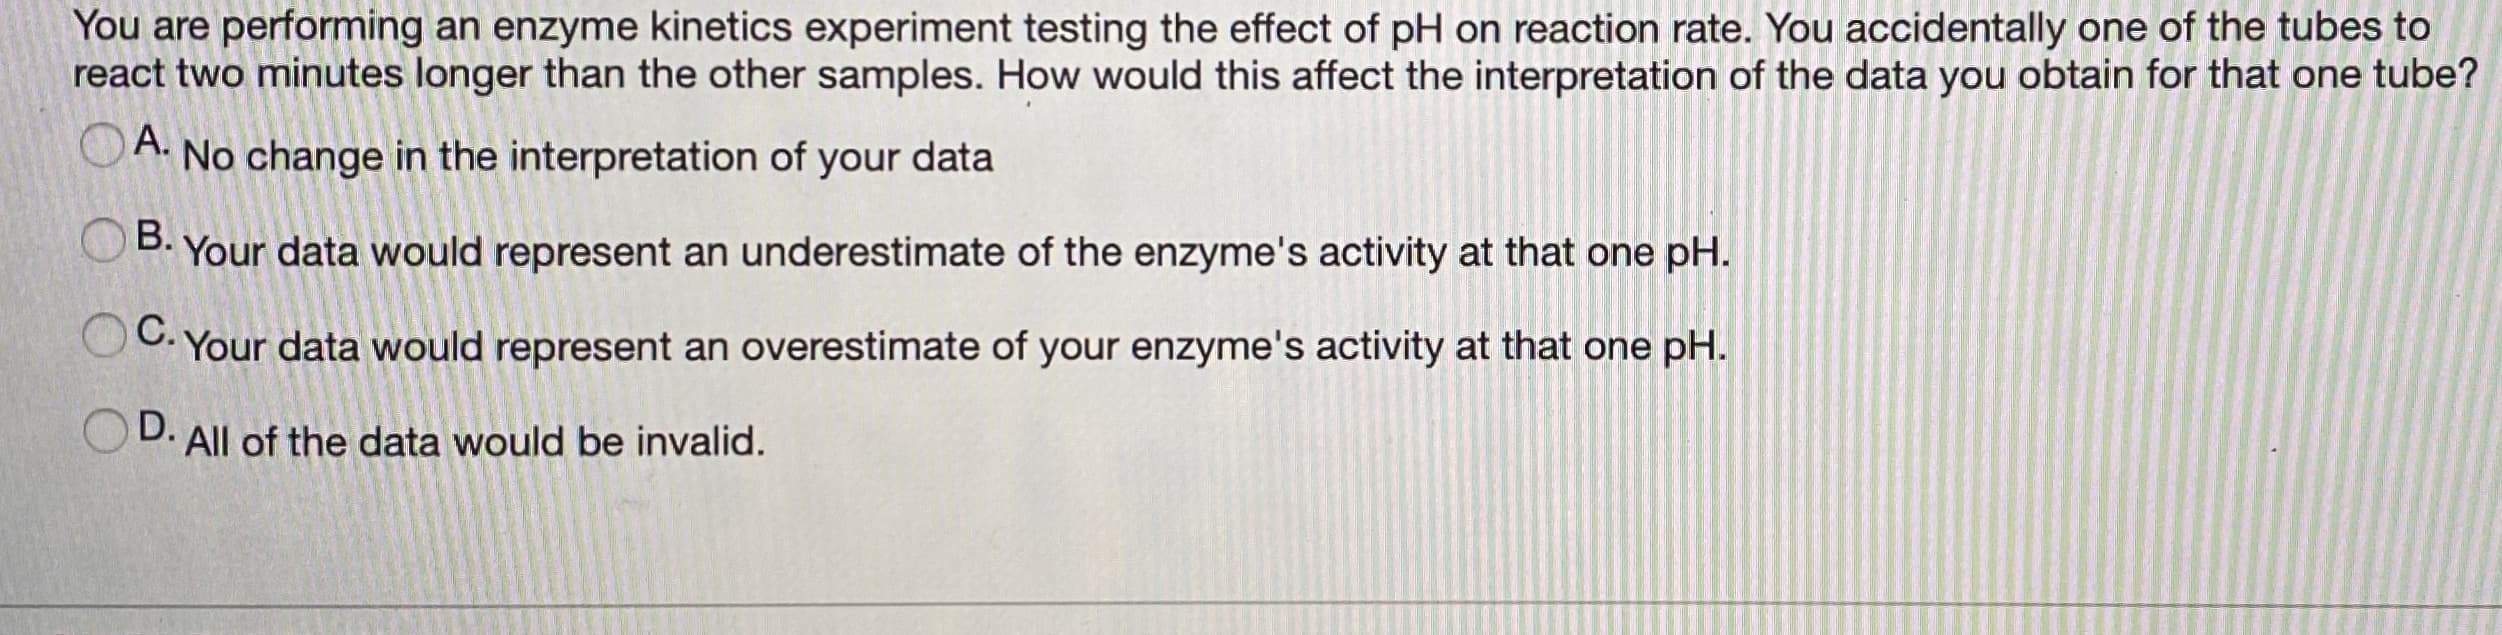 You are performing an enzyme kinetics experiment testing the effect of pH on reaction rate. You accidentally one of the tubes to
react two minutes longer than the other samples. How would this affect the interpretation of the data you obtain for that one tube?
A. No change in the interpretation of your data
B. Your data would represent an underestimate of the enzyme's activity at that one pH.
Your data would represent an overestimate of your enzyme's activity at that one pH.
D.
All of the data would be invalid.
